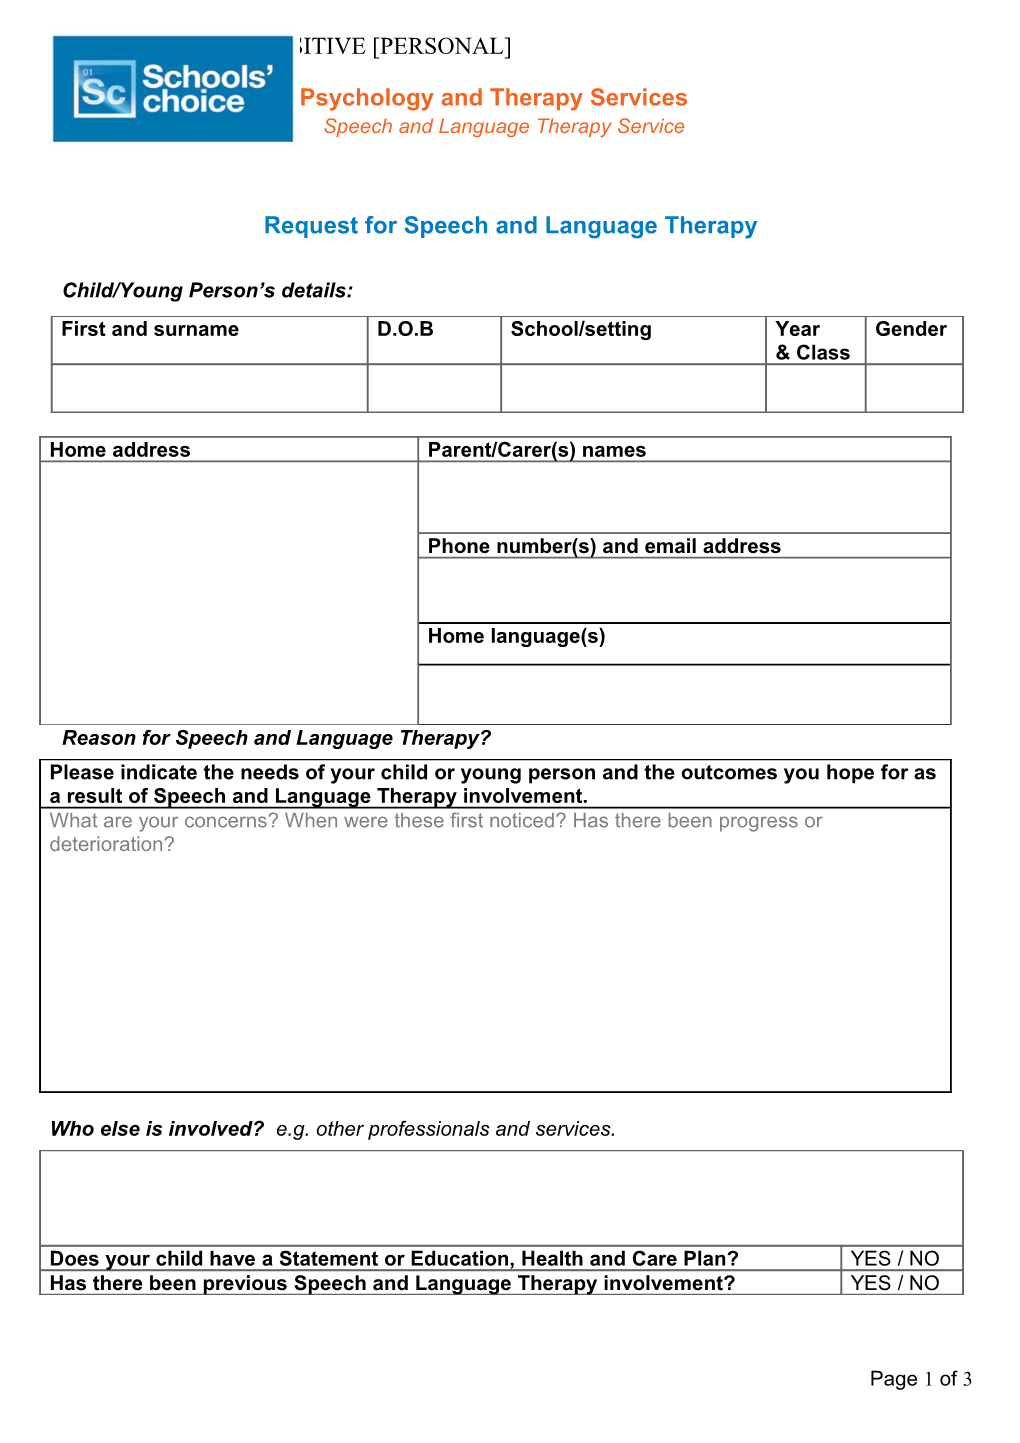 Request for Speech and Language Therapy